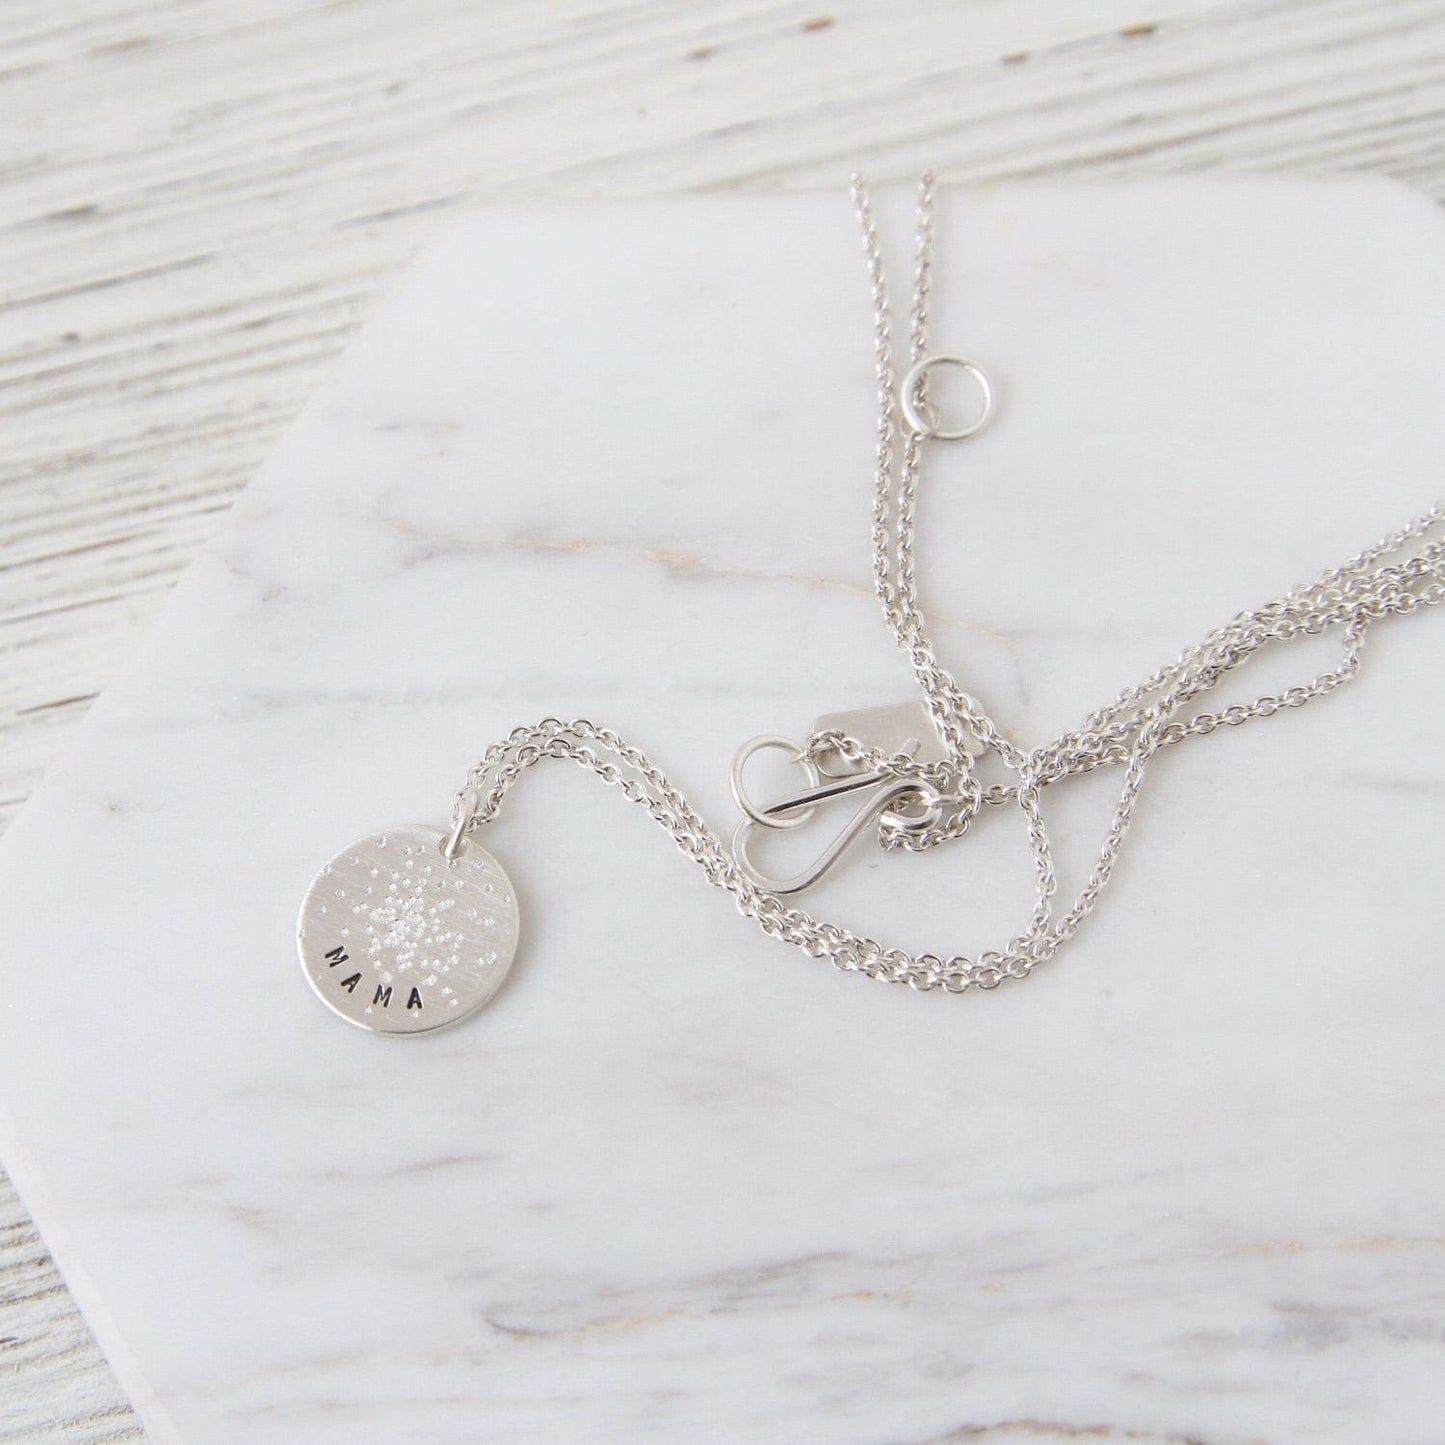 NKL Diamond Dusted Mini Coin Necklace - "Mama"